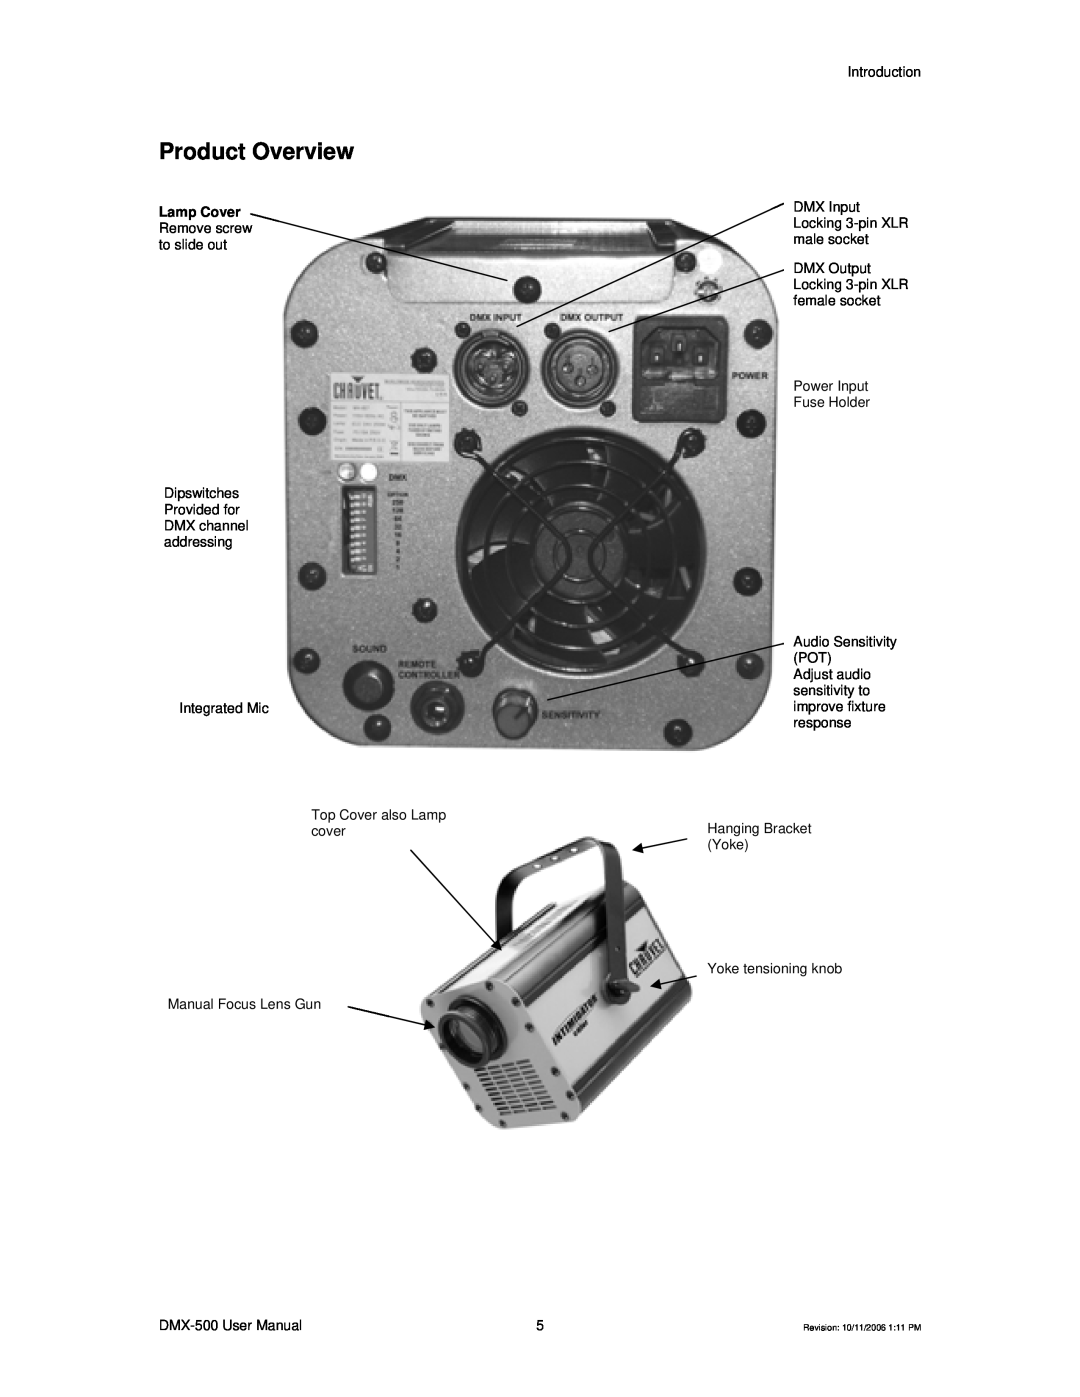 Chauvet DMX-500 user manual Product Overview, Lamp Cover Remove screw to slide out 